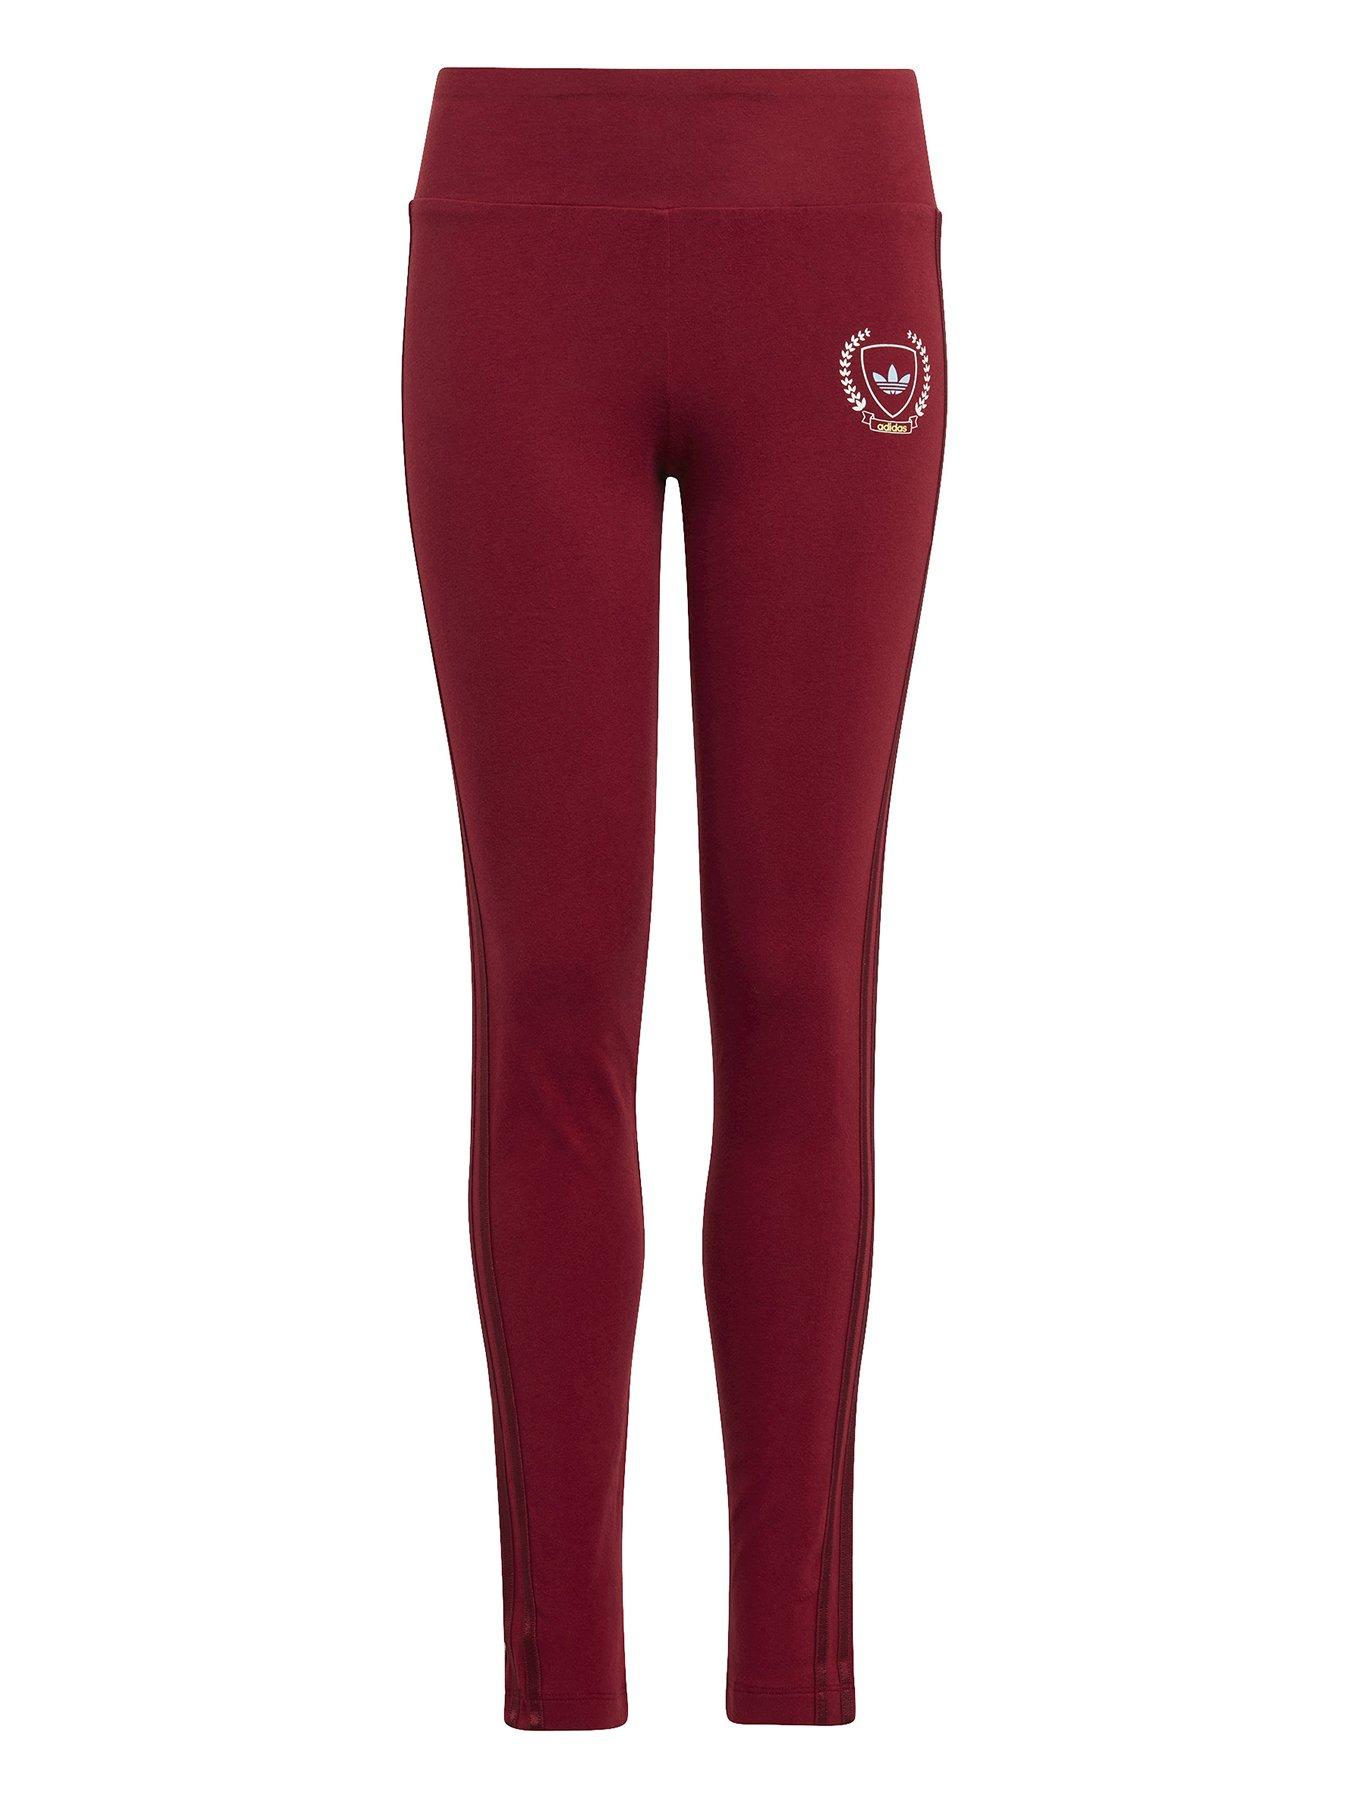  adidas Originals Bottoms Big Girls' Leggings, Core Red/White,  XX-Small : Clothing, Shoes & Jewelry